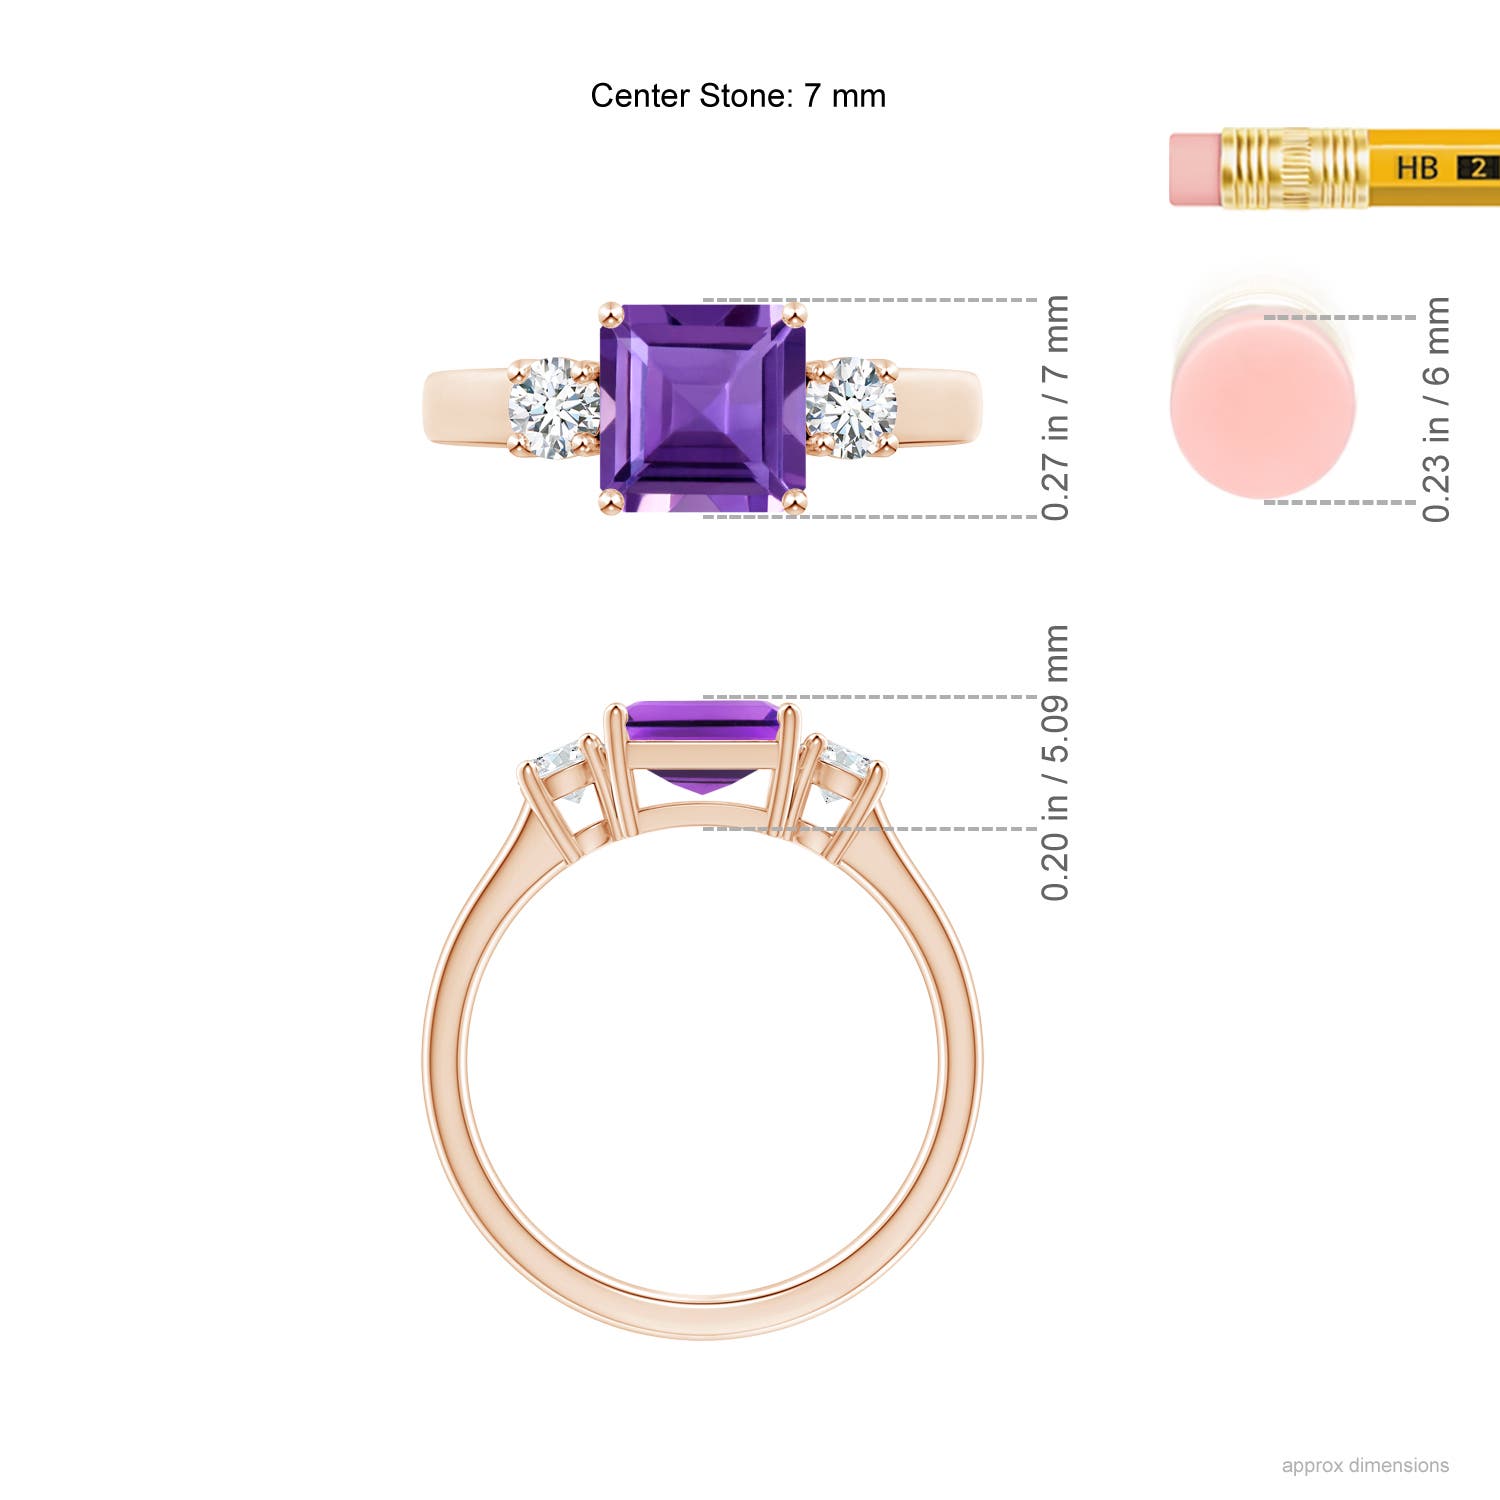 AAA - Amethyst / 1.62 CT / 14 KT Rose Gold